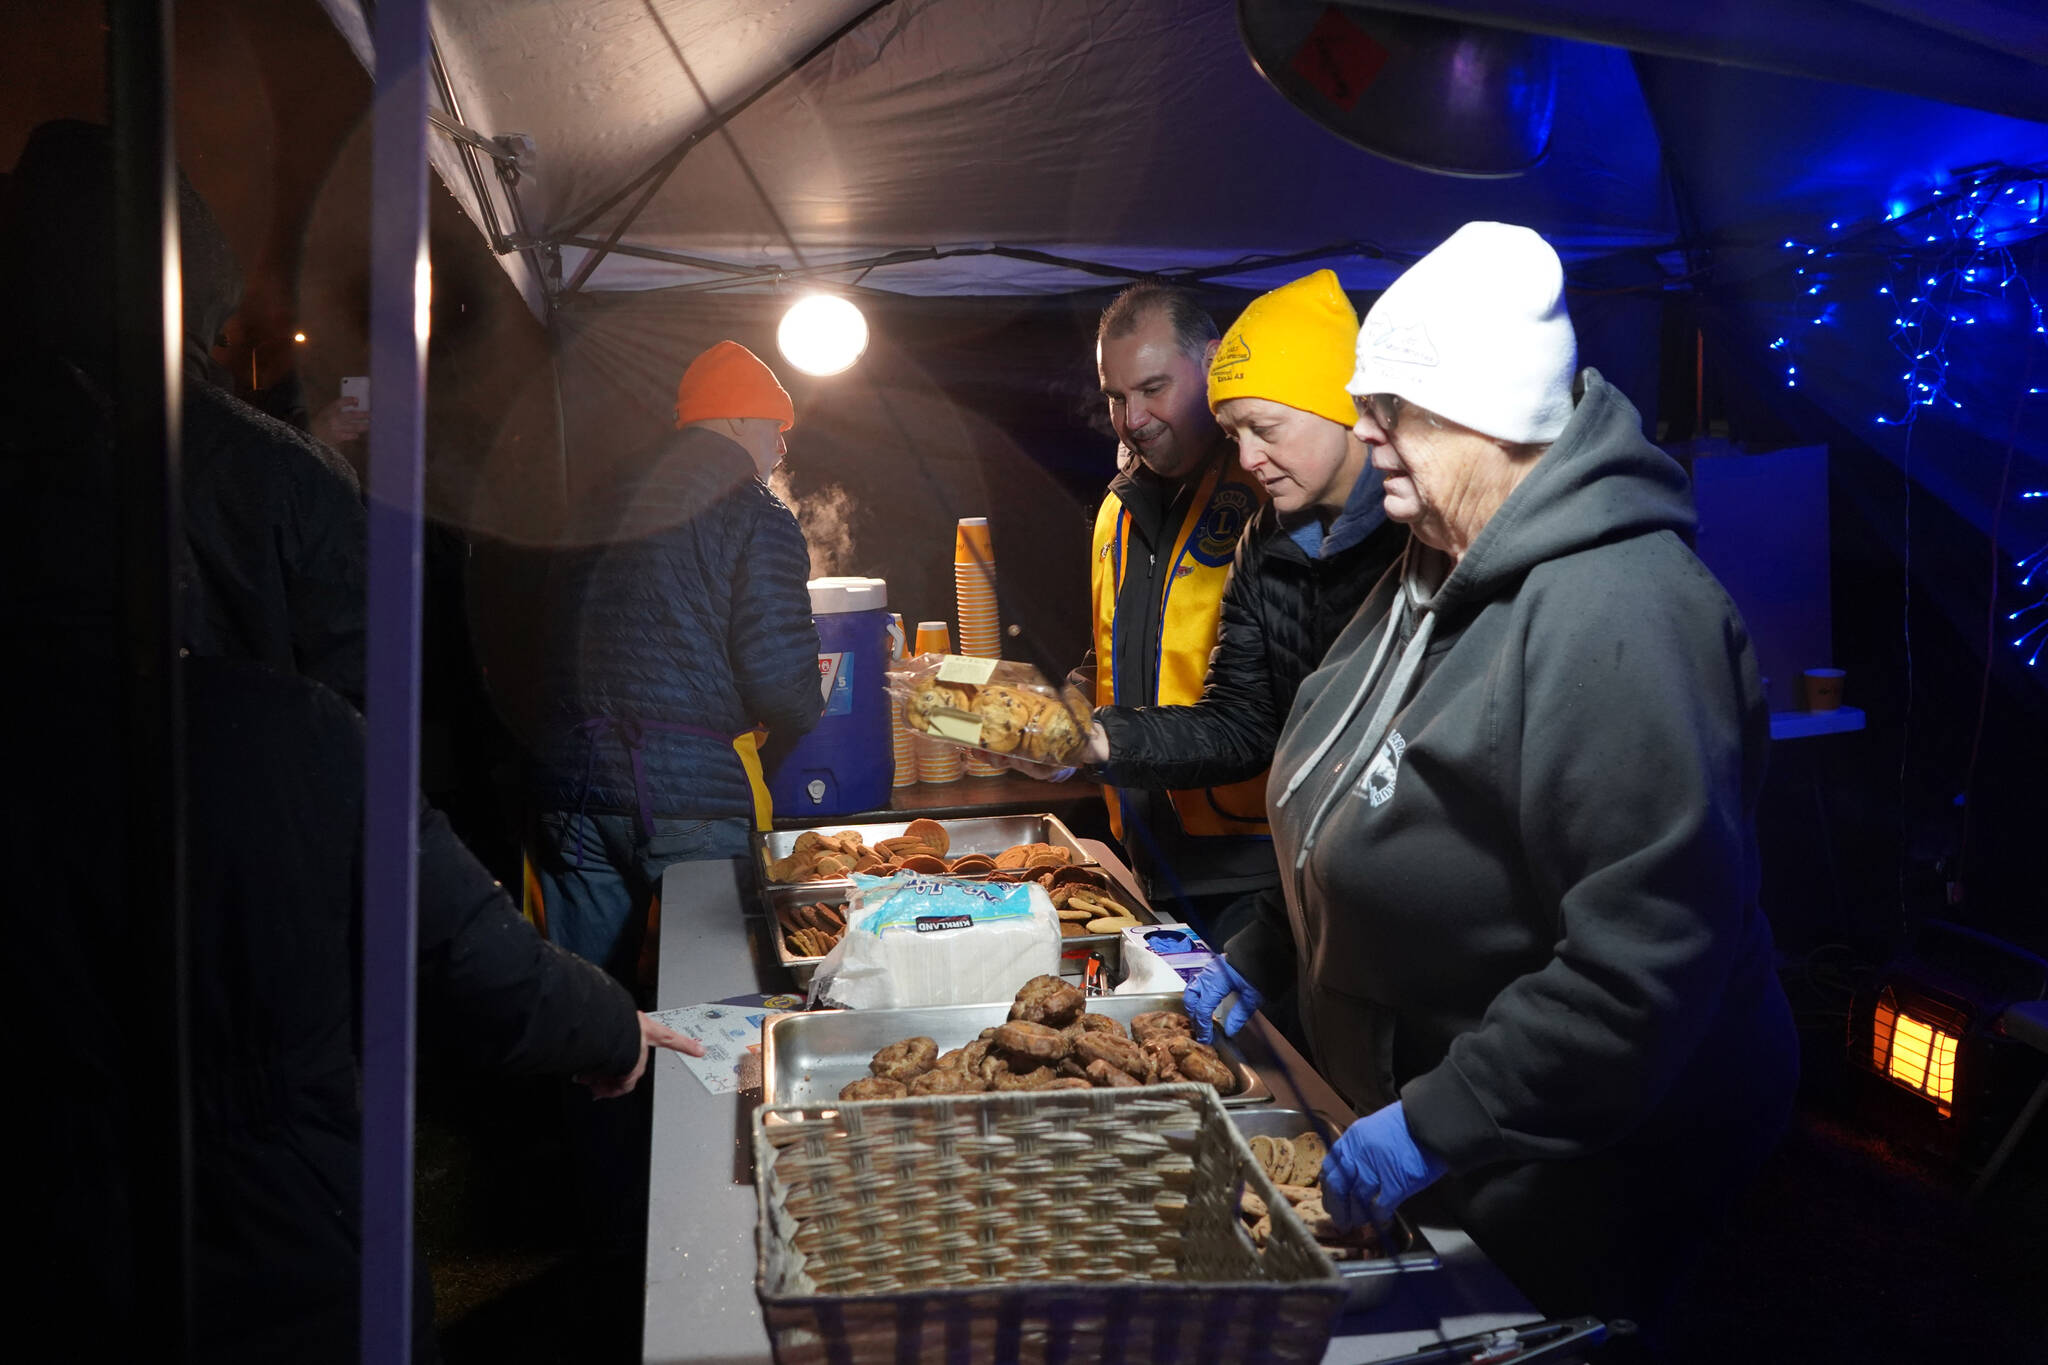 Lions Club members pass out hot chocolate and cookies during Christmas Comes to Kenai festivities at the Kenai Chamber of Commerce and Visitor Center in Kenai, Alaska, on Friday, Nov. 24, 2023. (Jake Dye/Peninsula Clarion)